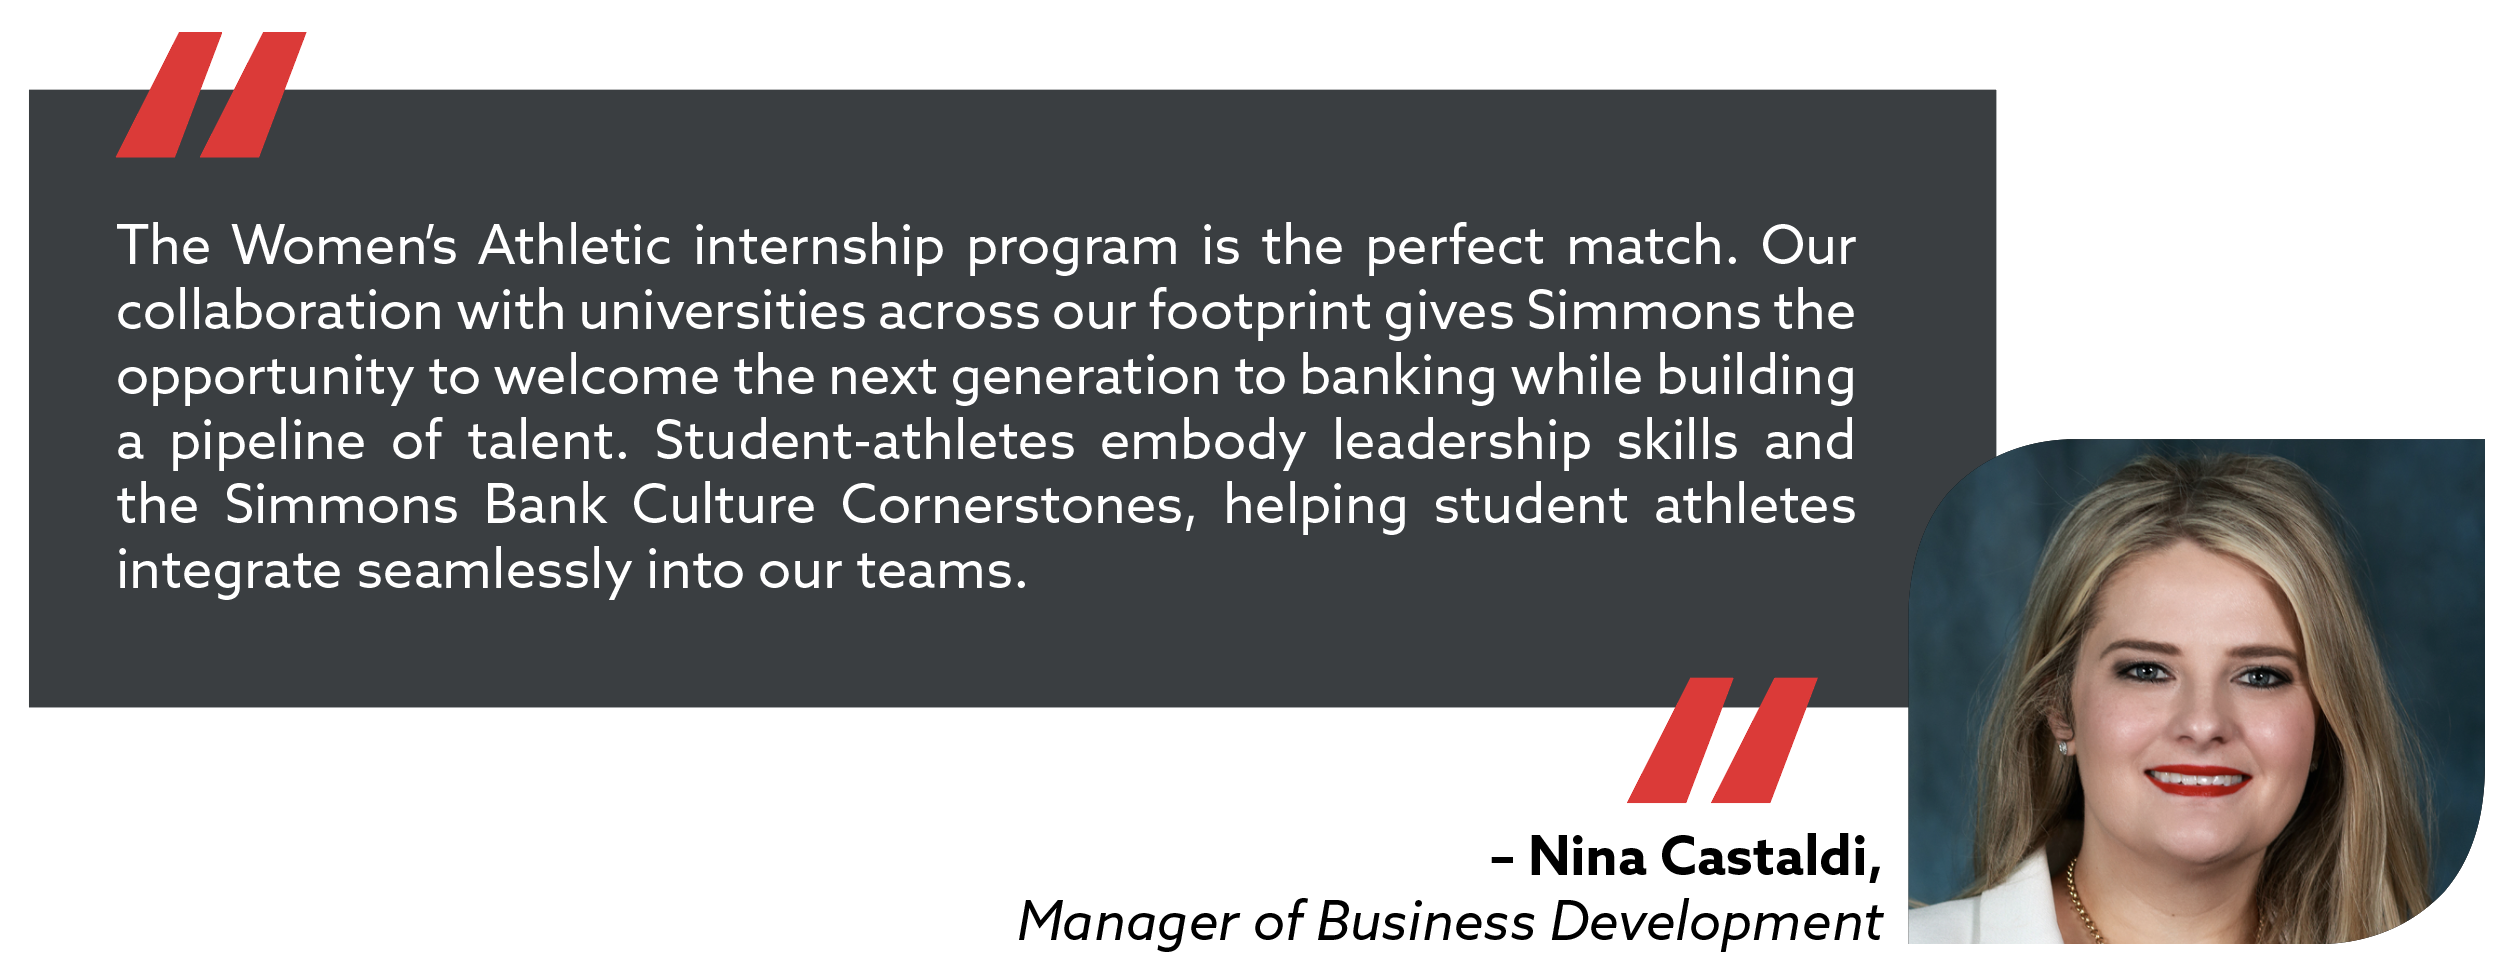 quote from manager of business development, Nina Castaldi. The Women's Athletic internship program is the perfect match. Our collaboration with the universities across our footprint gives Simmons the opportunity to welcome the next generation to banking while building a pipeline of talent. Student-athletes embody leadership skills and the Simmons Bank Culture Cornerstones, helping student athletes integrate seamlessly into our teams.